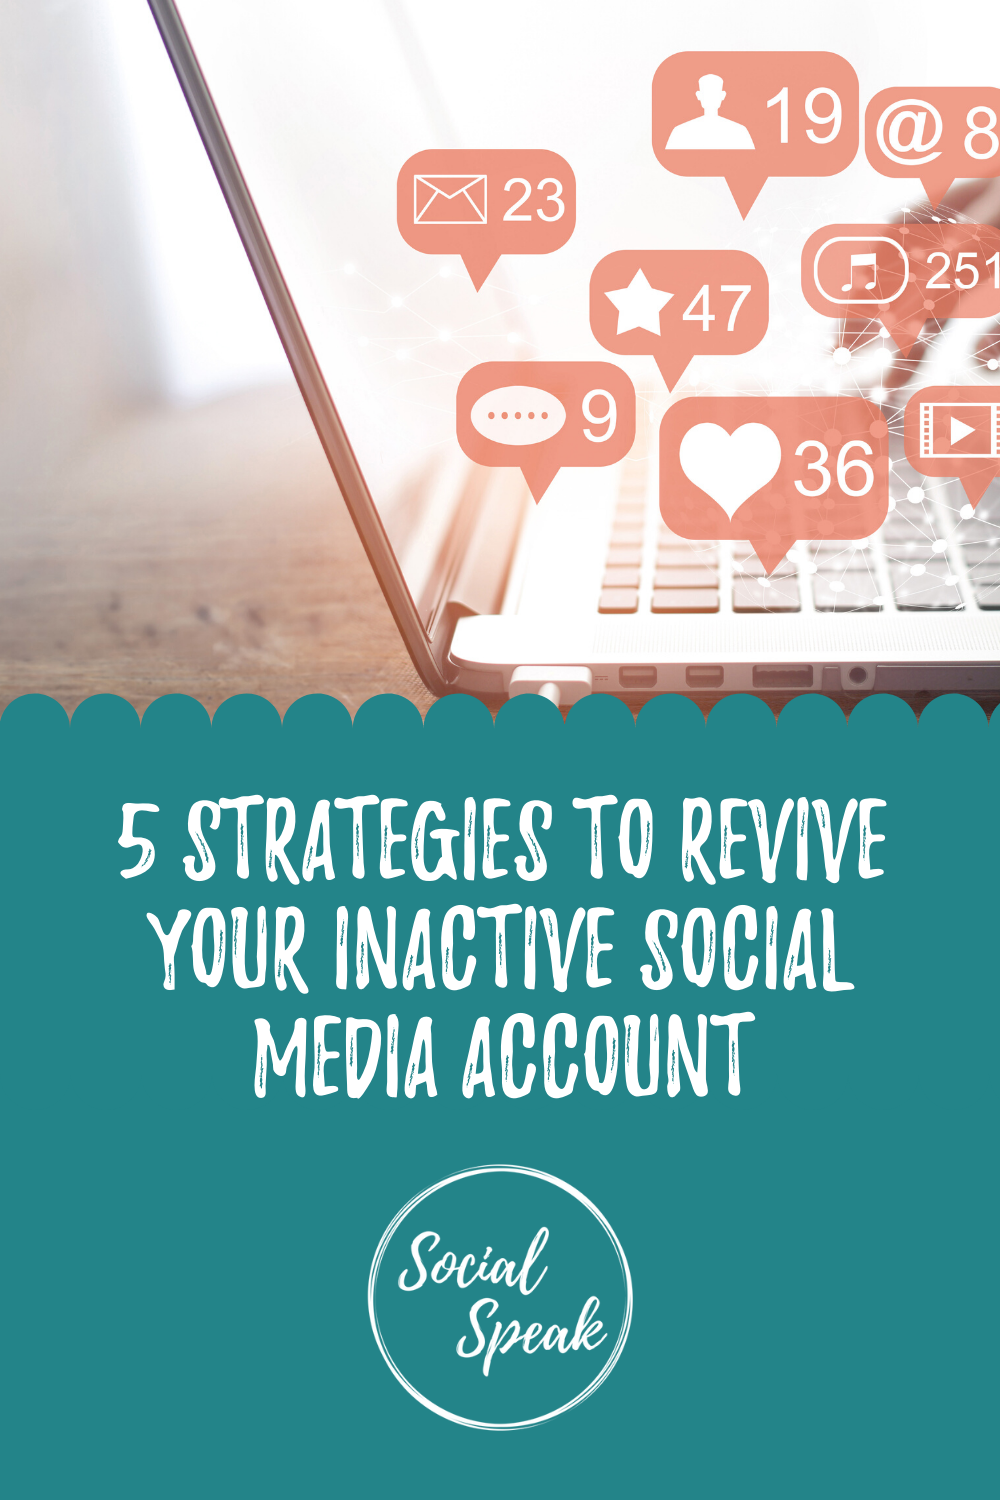 5 Strategies to Revive Your Inactive Social Media Account